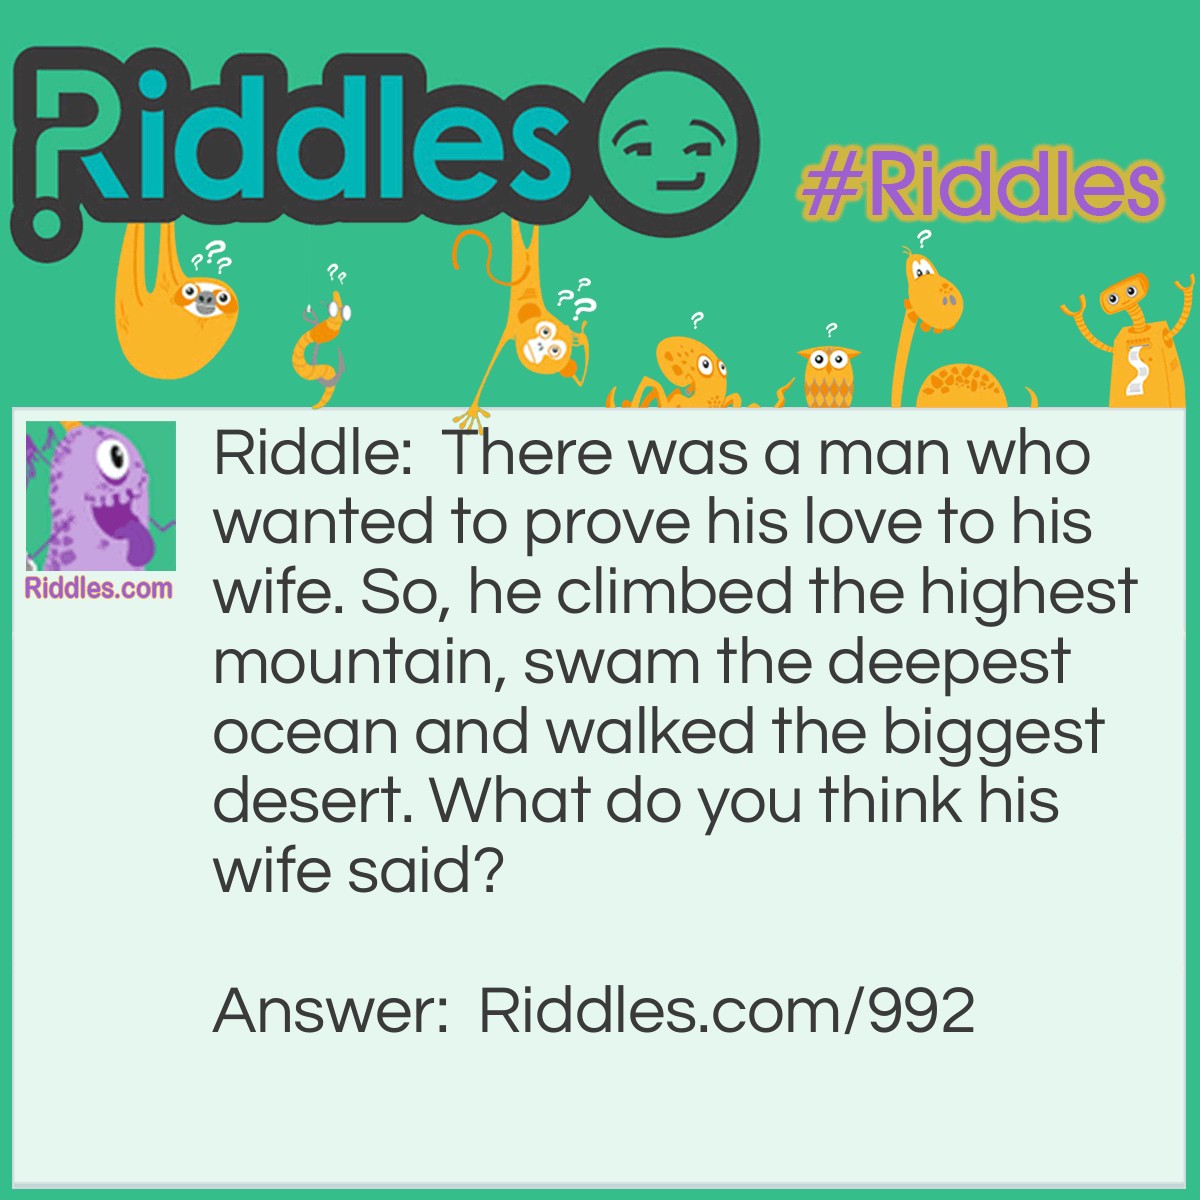 Riddle: There was a man who wanted to prove his love to his wife. So, he climbed the highest mountain, swam the deepest ocean and walked the biggest desert. What do you think his wife said? Answer: Nothing. She divorced him for never being at home.